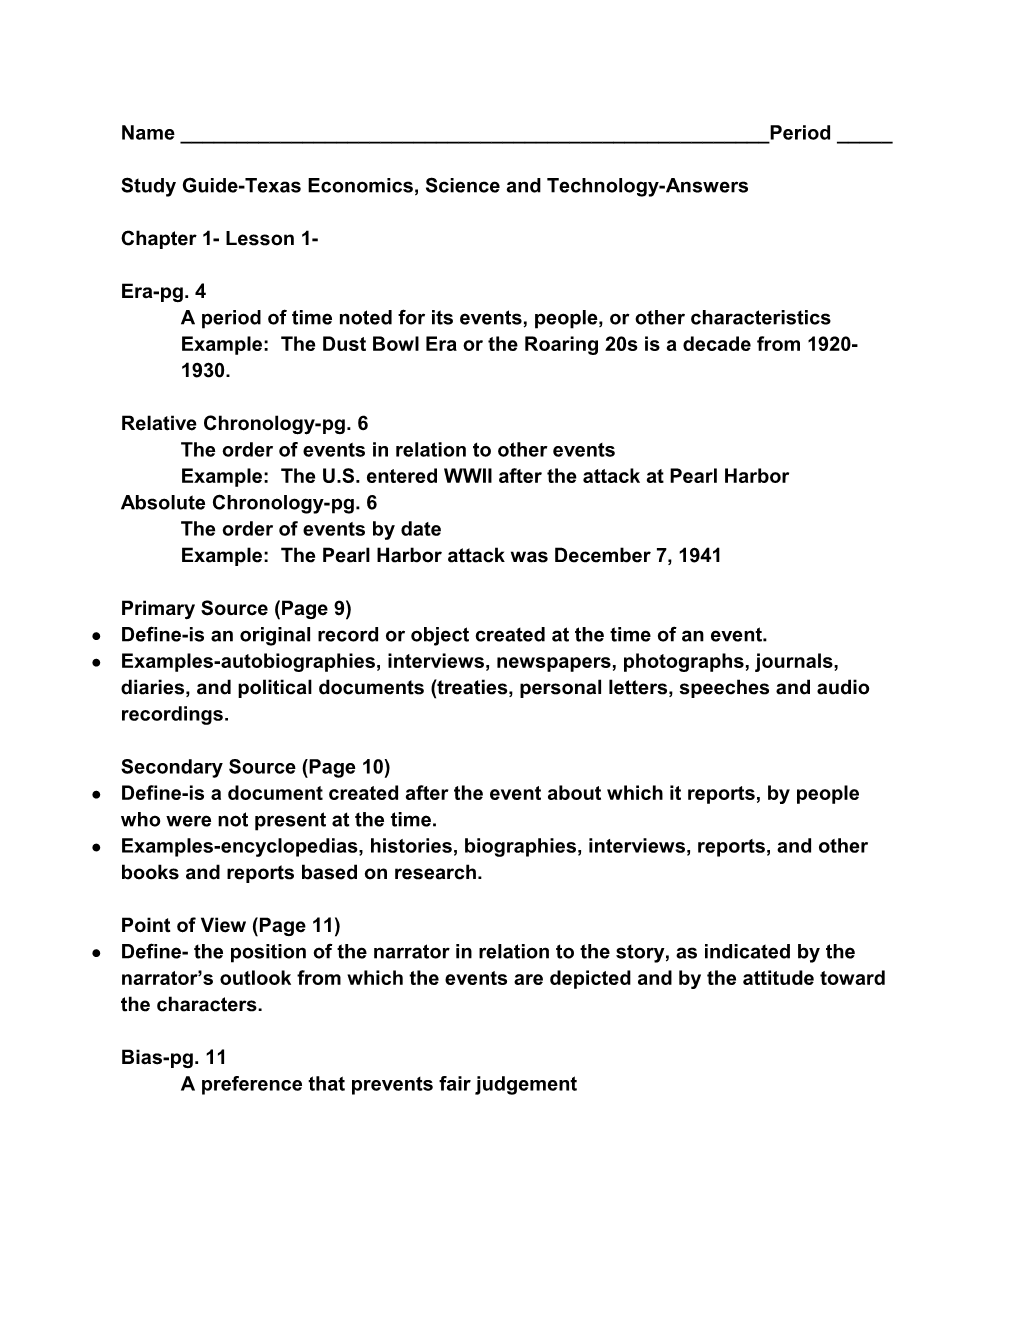 Study Guide-Texas Economics, Science and Technology-Answers